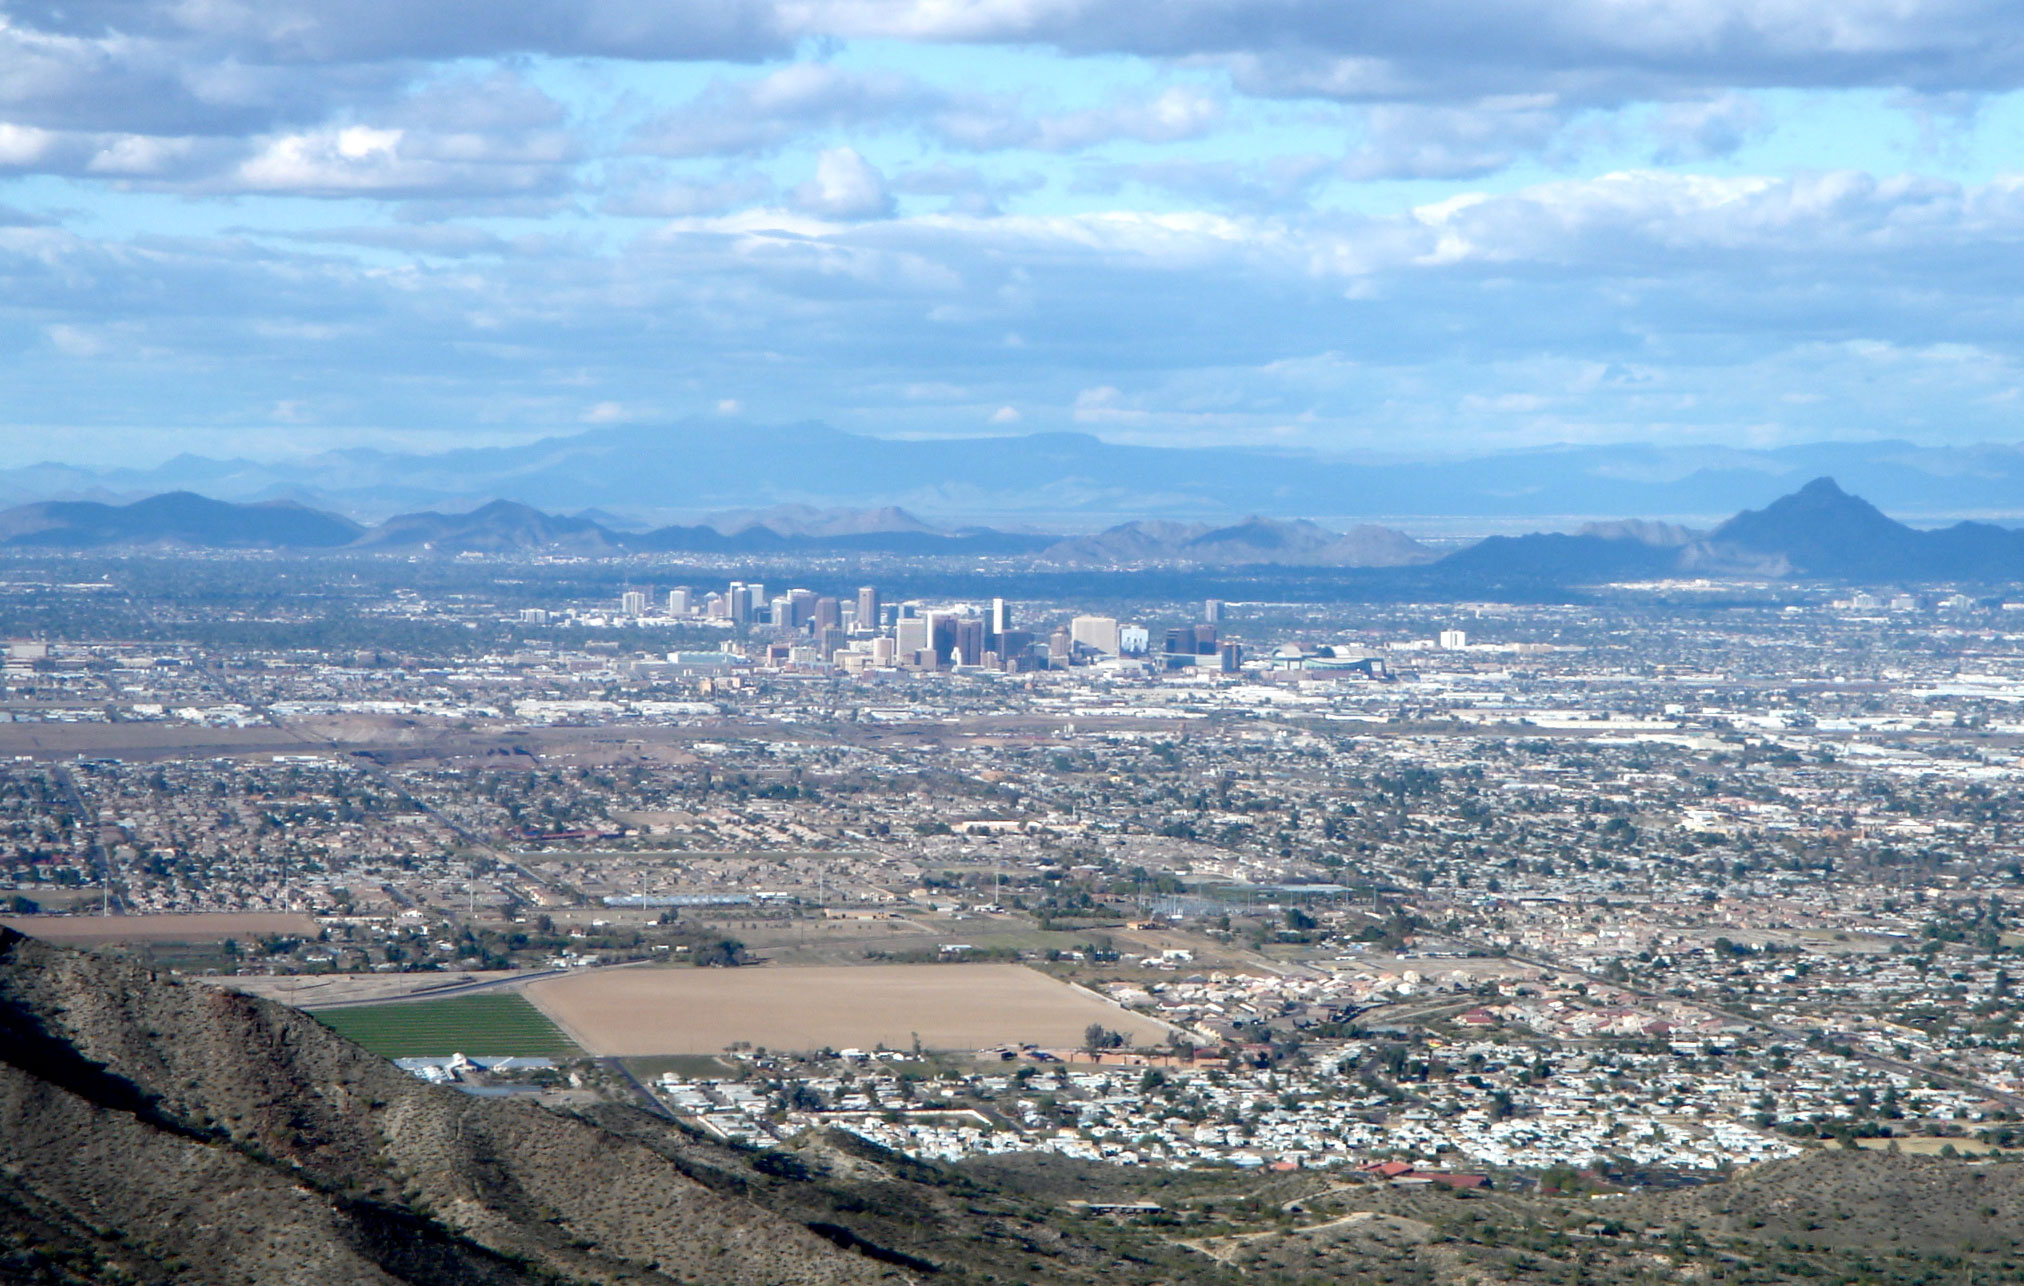 Photograph of Phoenix, Arizona, from a high point near the city. The photo shows development (roads, buildings) on a flat plain with mountains rising in the distance. Between the mountains and the nearest buildings is a cluster of tall buildings in downtown Phoenix.